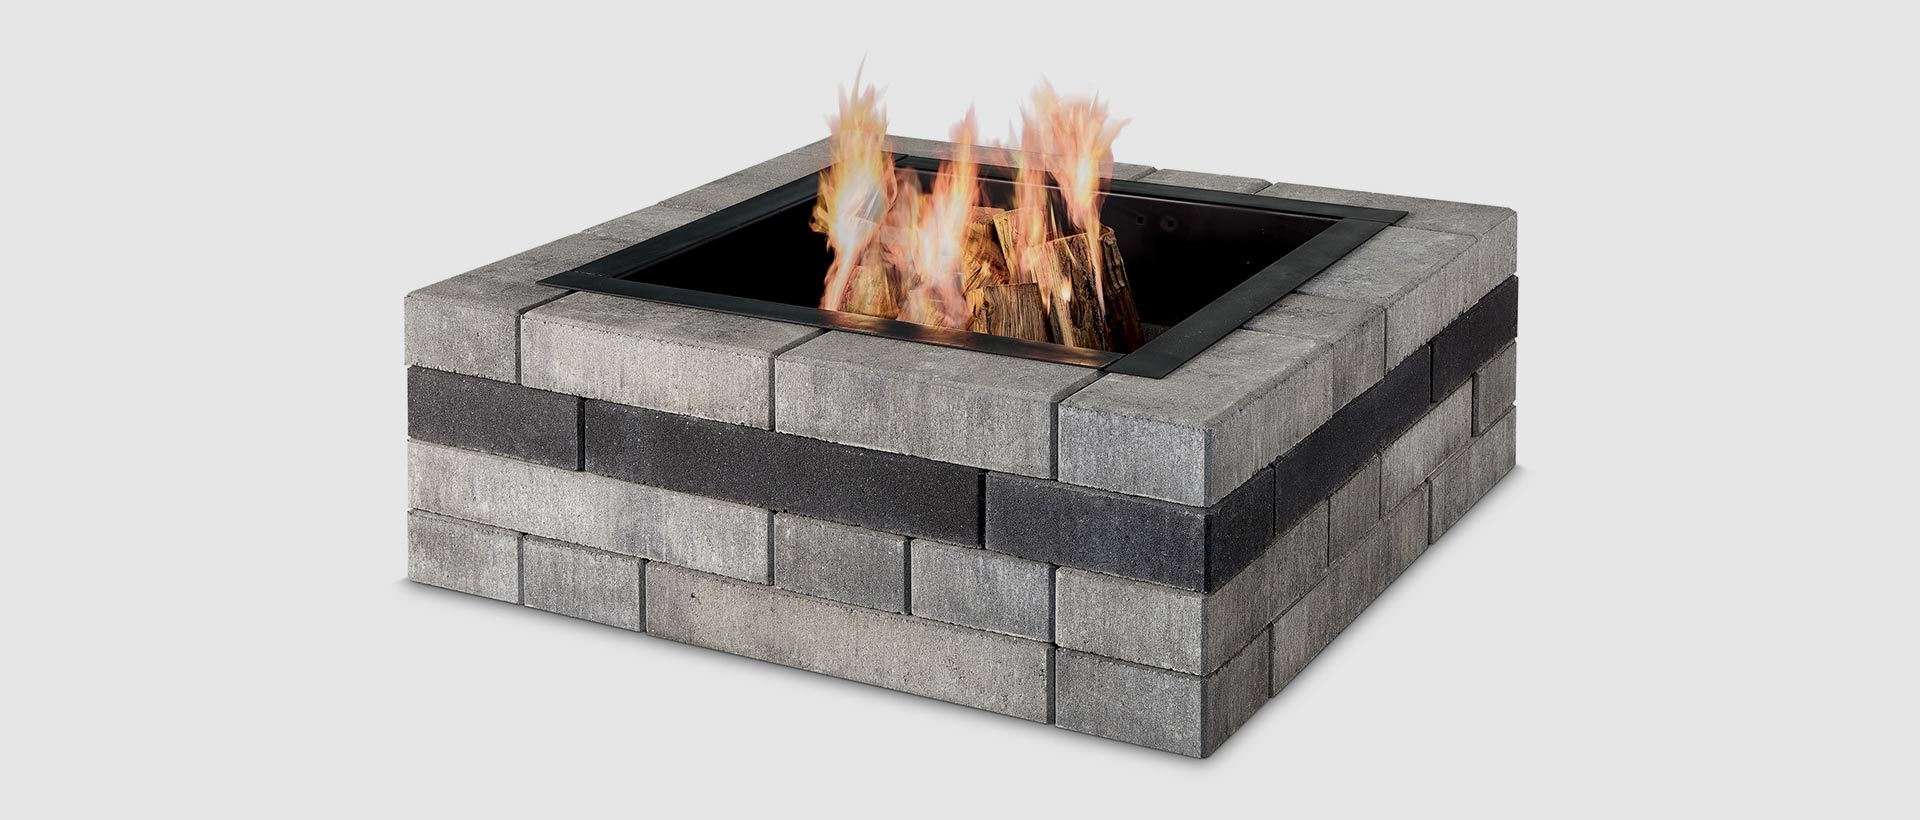 Contemporary Wood Burning Fire Pit